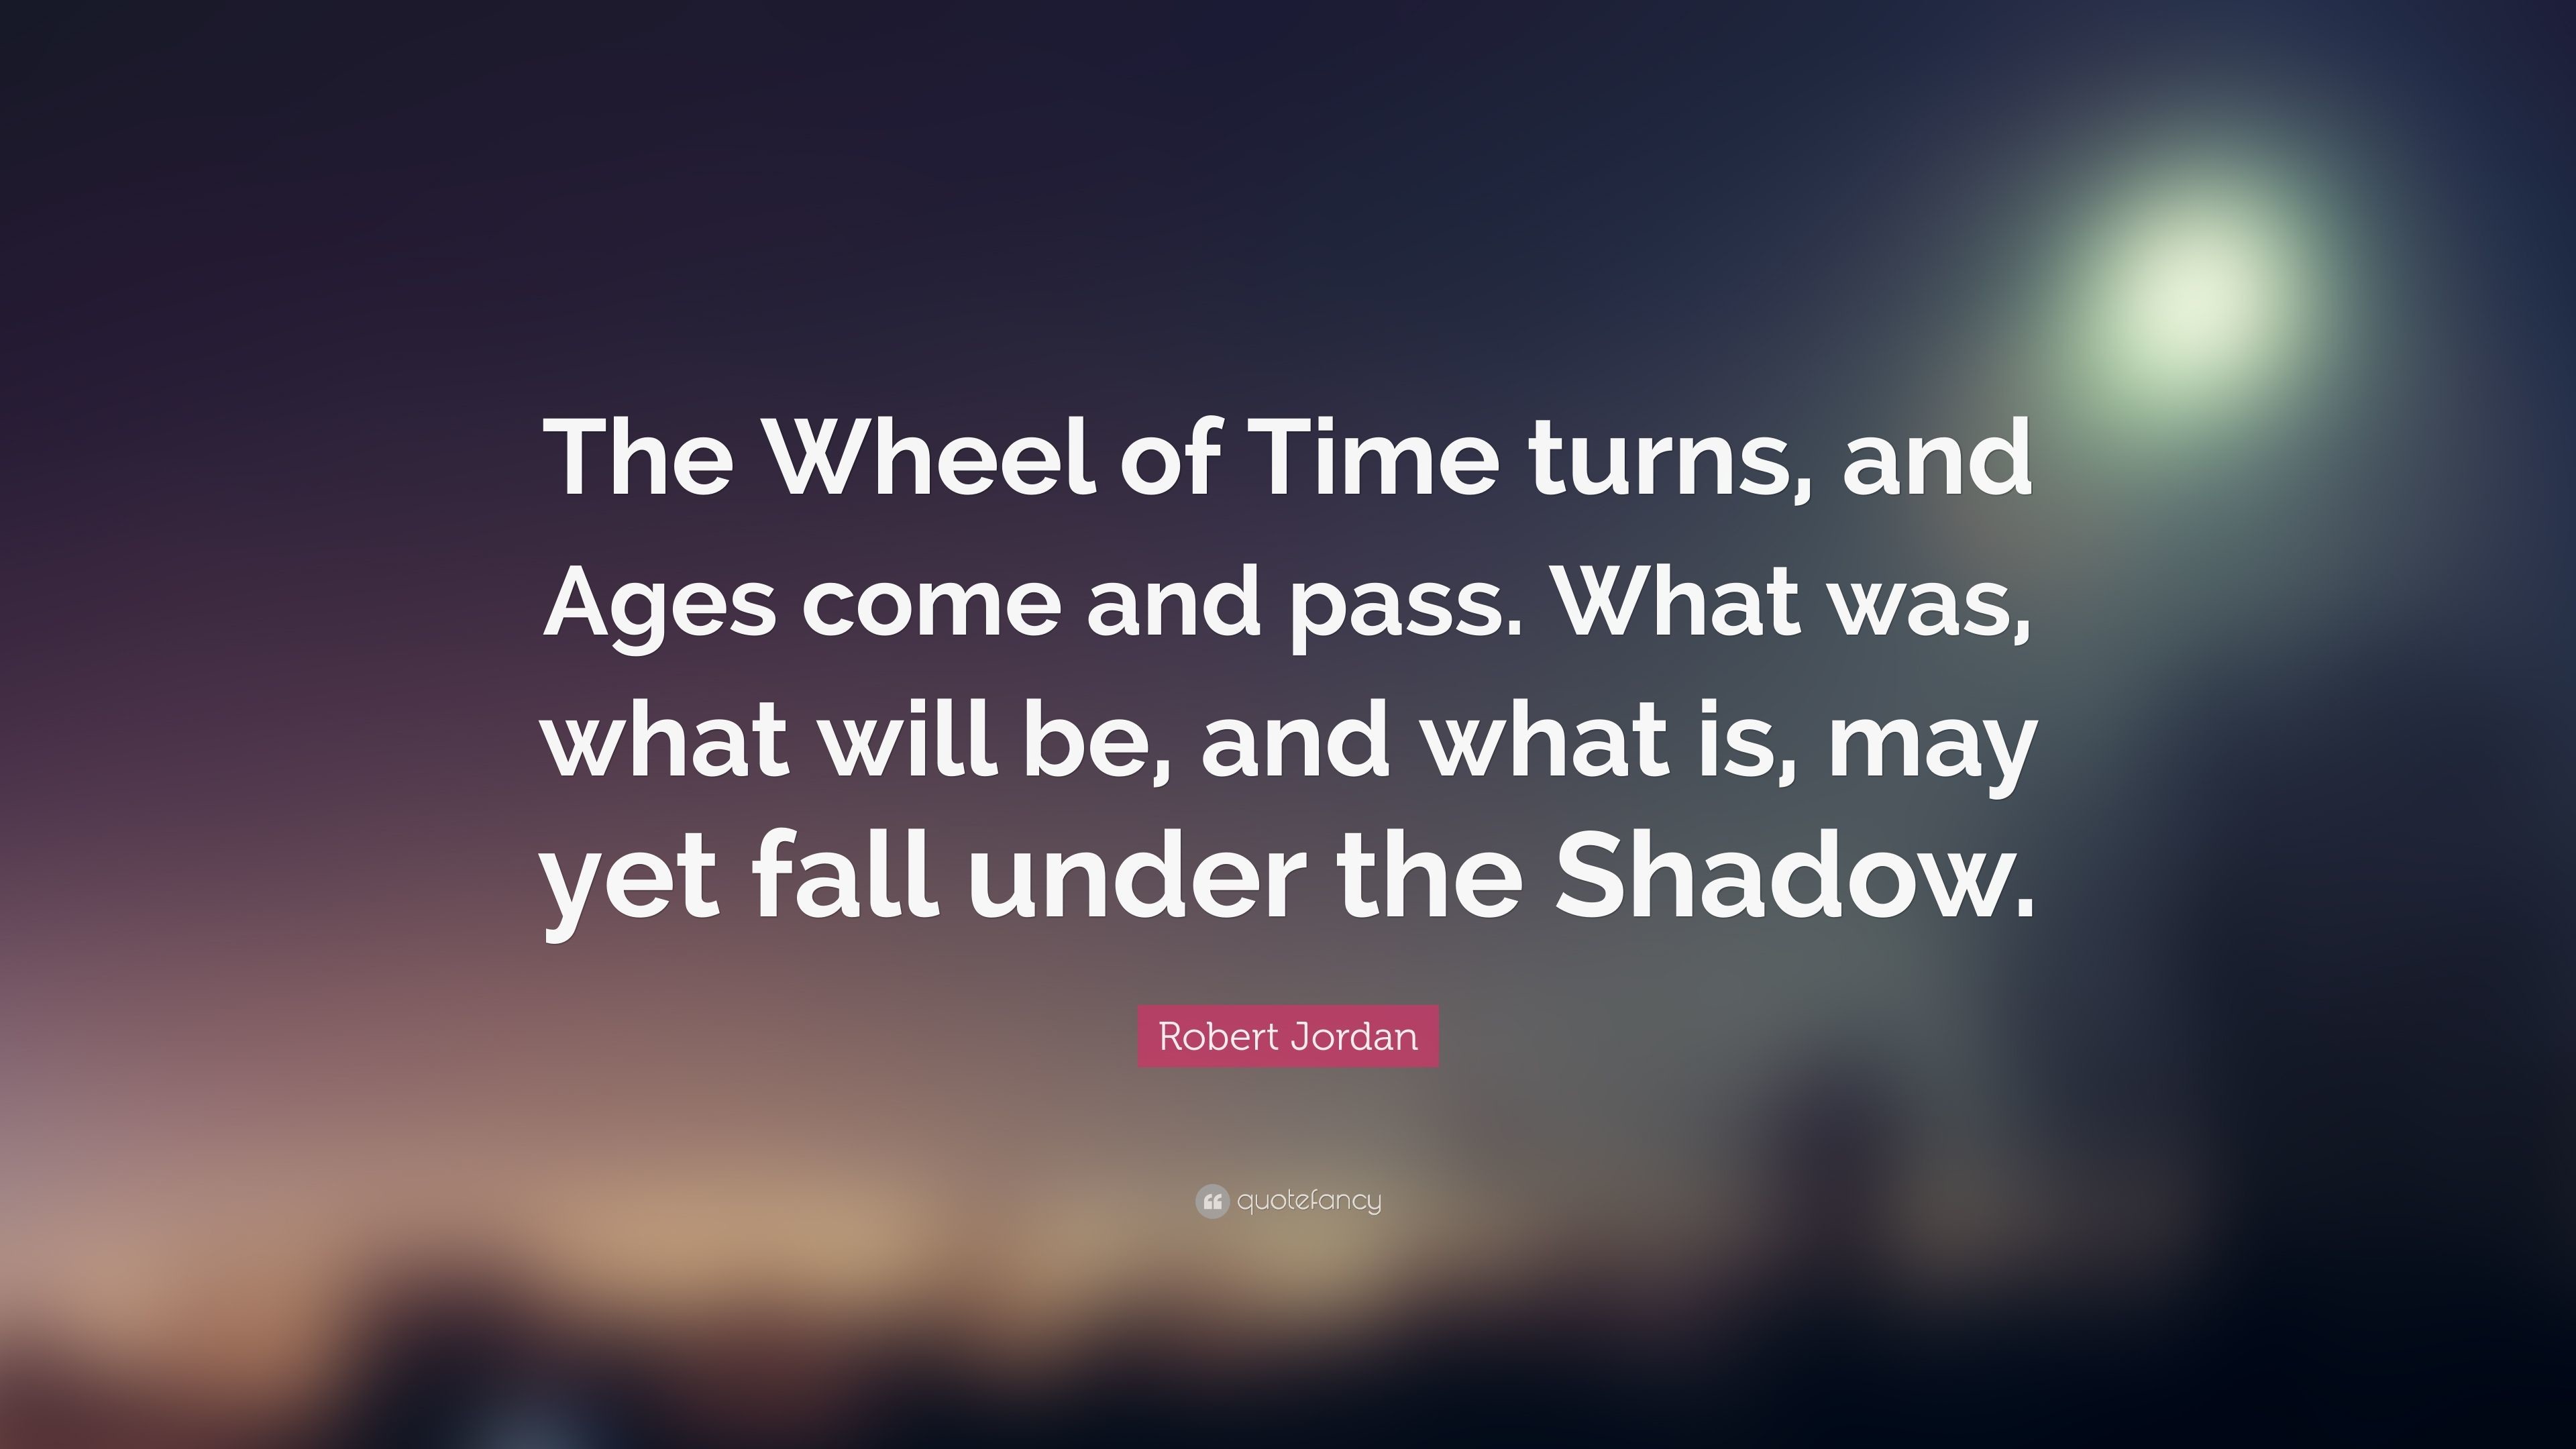 3840x2160 Robert Jordan Quote: “The Wheel of Time turns, and Ages come and pass